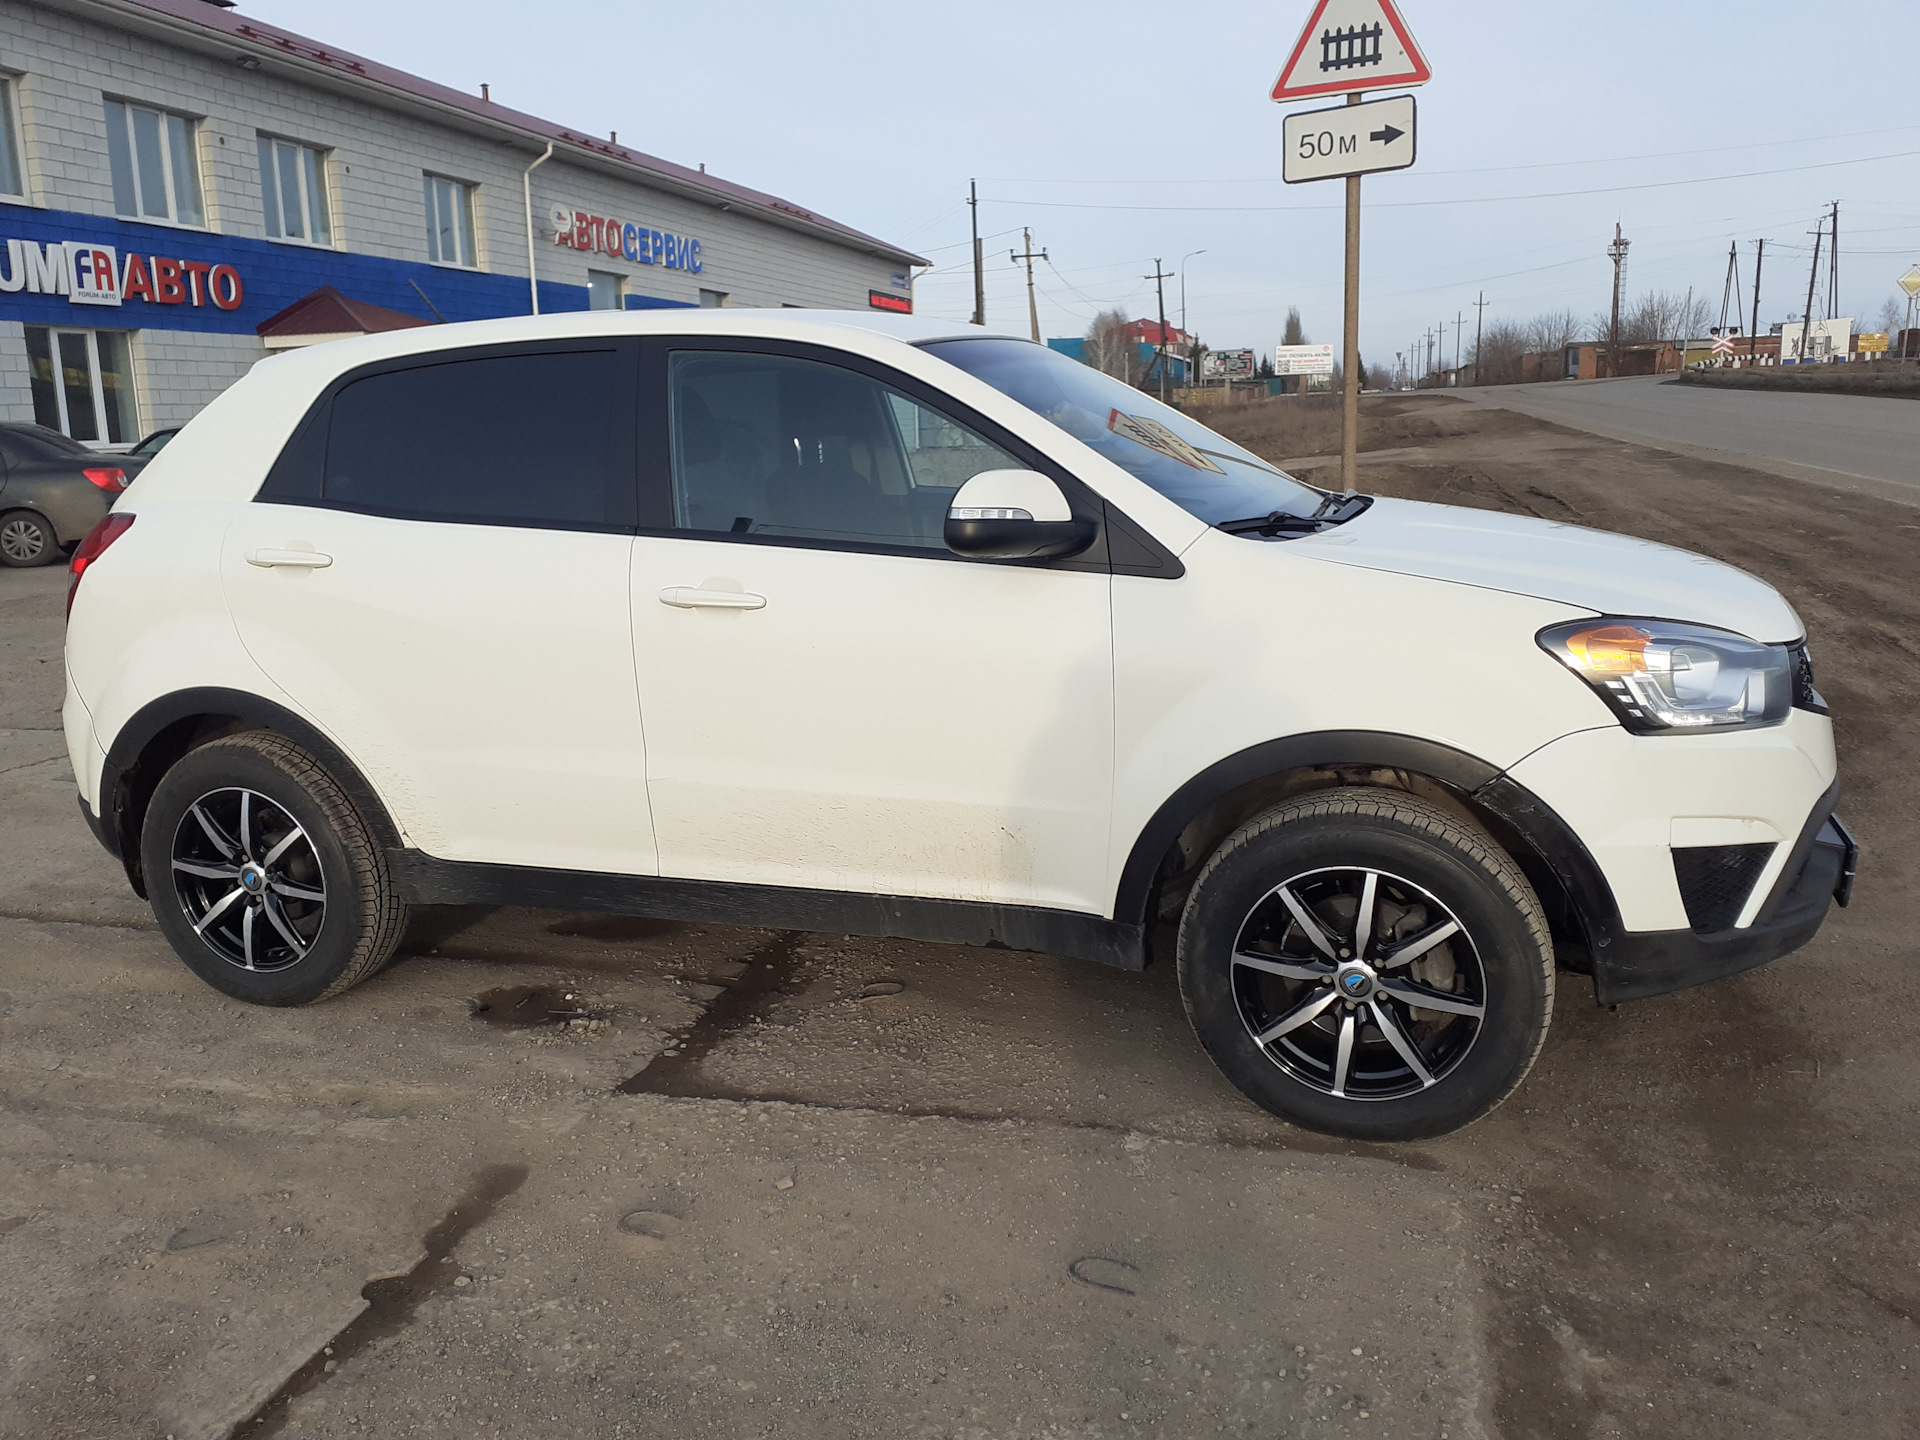 Ssangyong new actyon диски. SSANGYONG Actyon 18 диски. Актион Нью на r18. Диски на ССАНГЙОНГ Актион Нью r16. Колеса r17 SSANGYONG Actyon New.